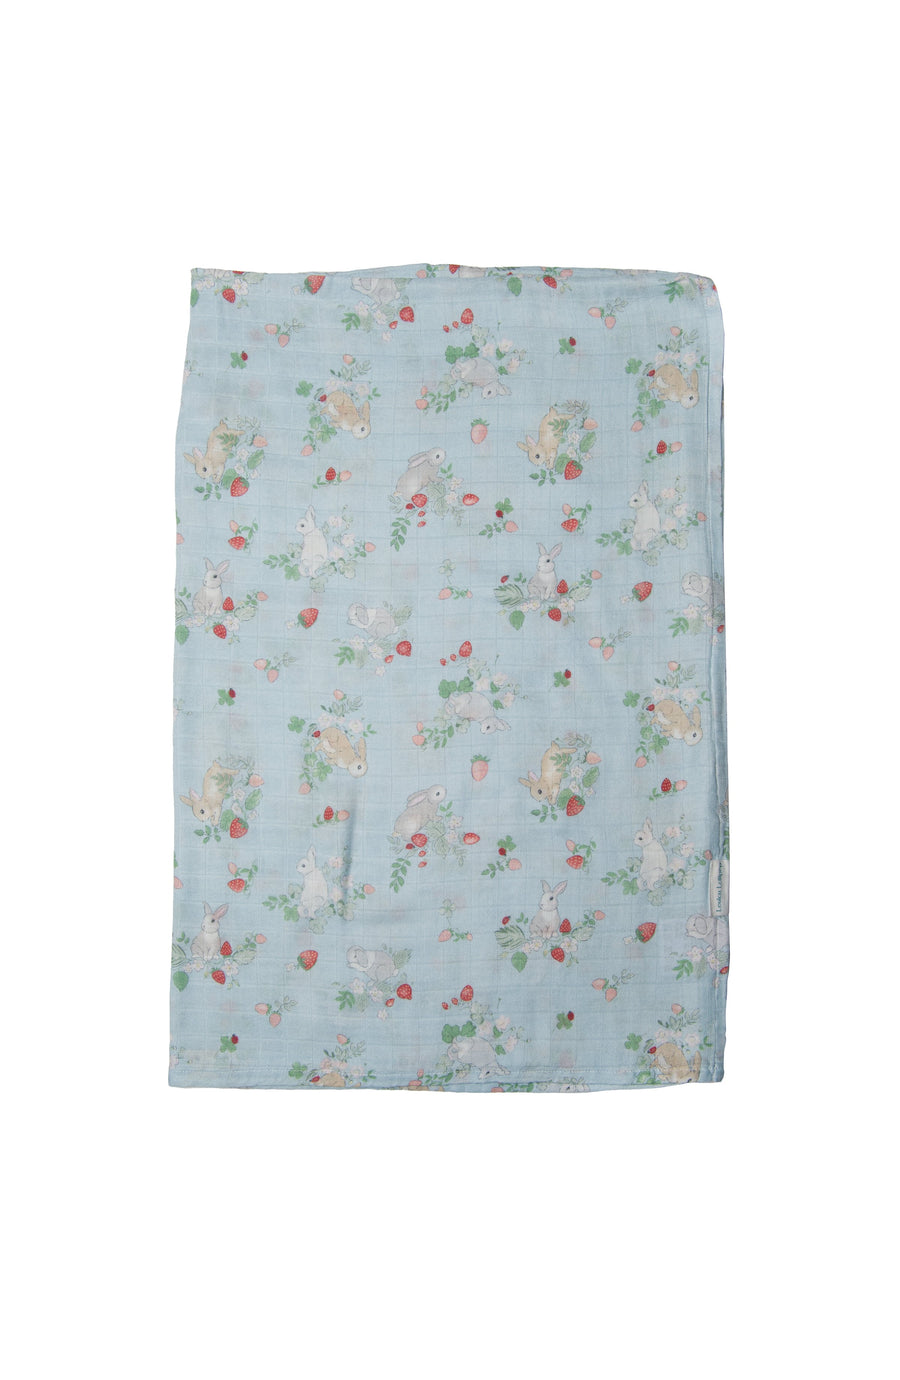 Loulou Lollipop - Muslin Swaddle - Some Bunny Loves You